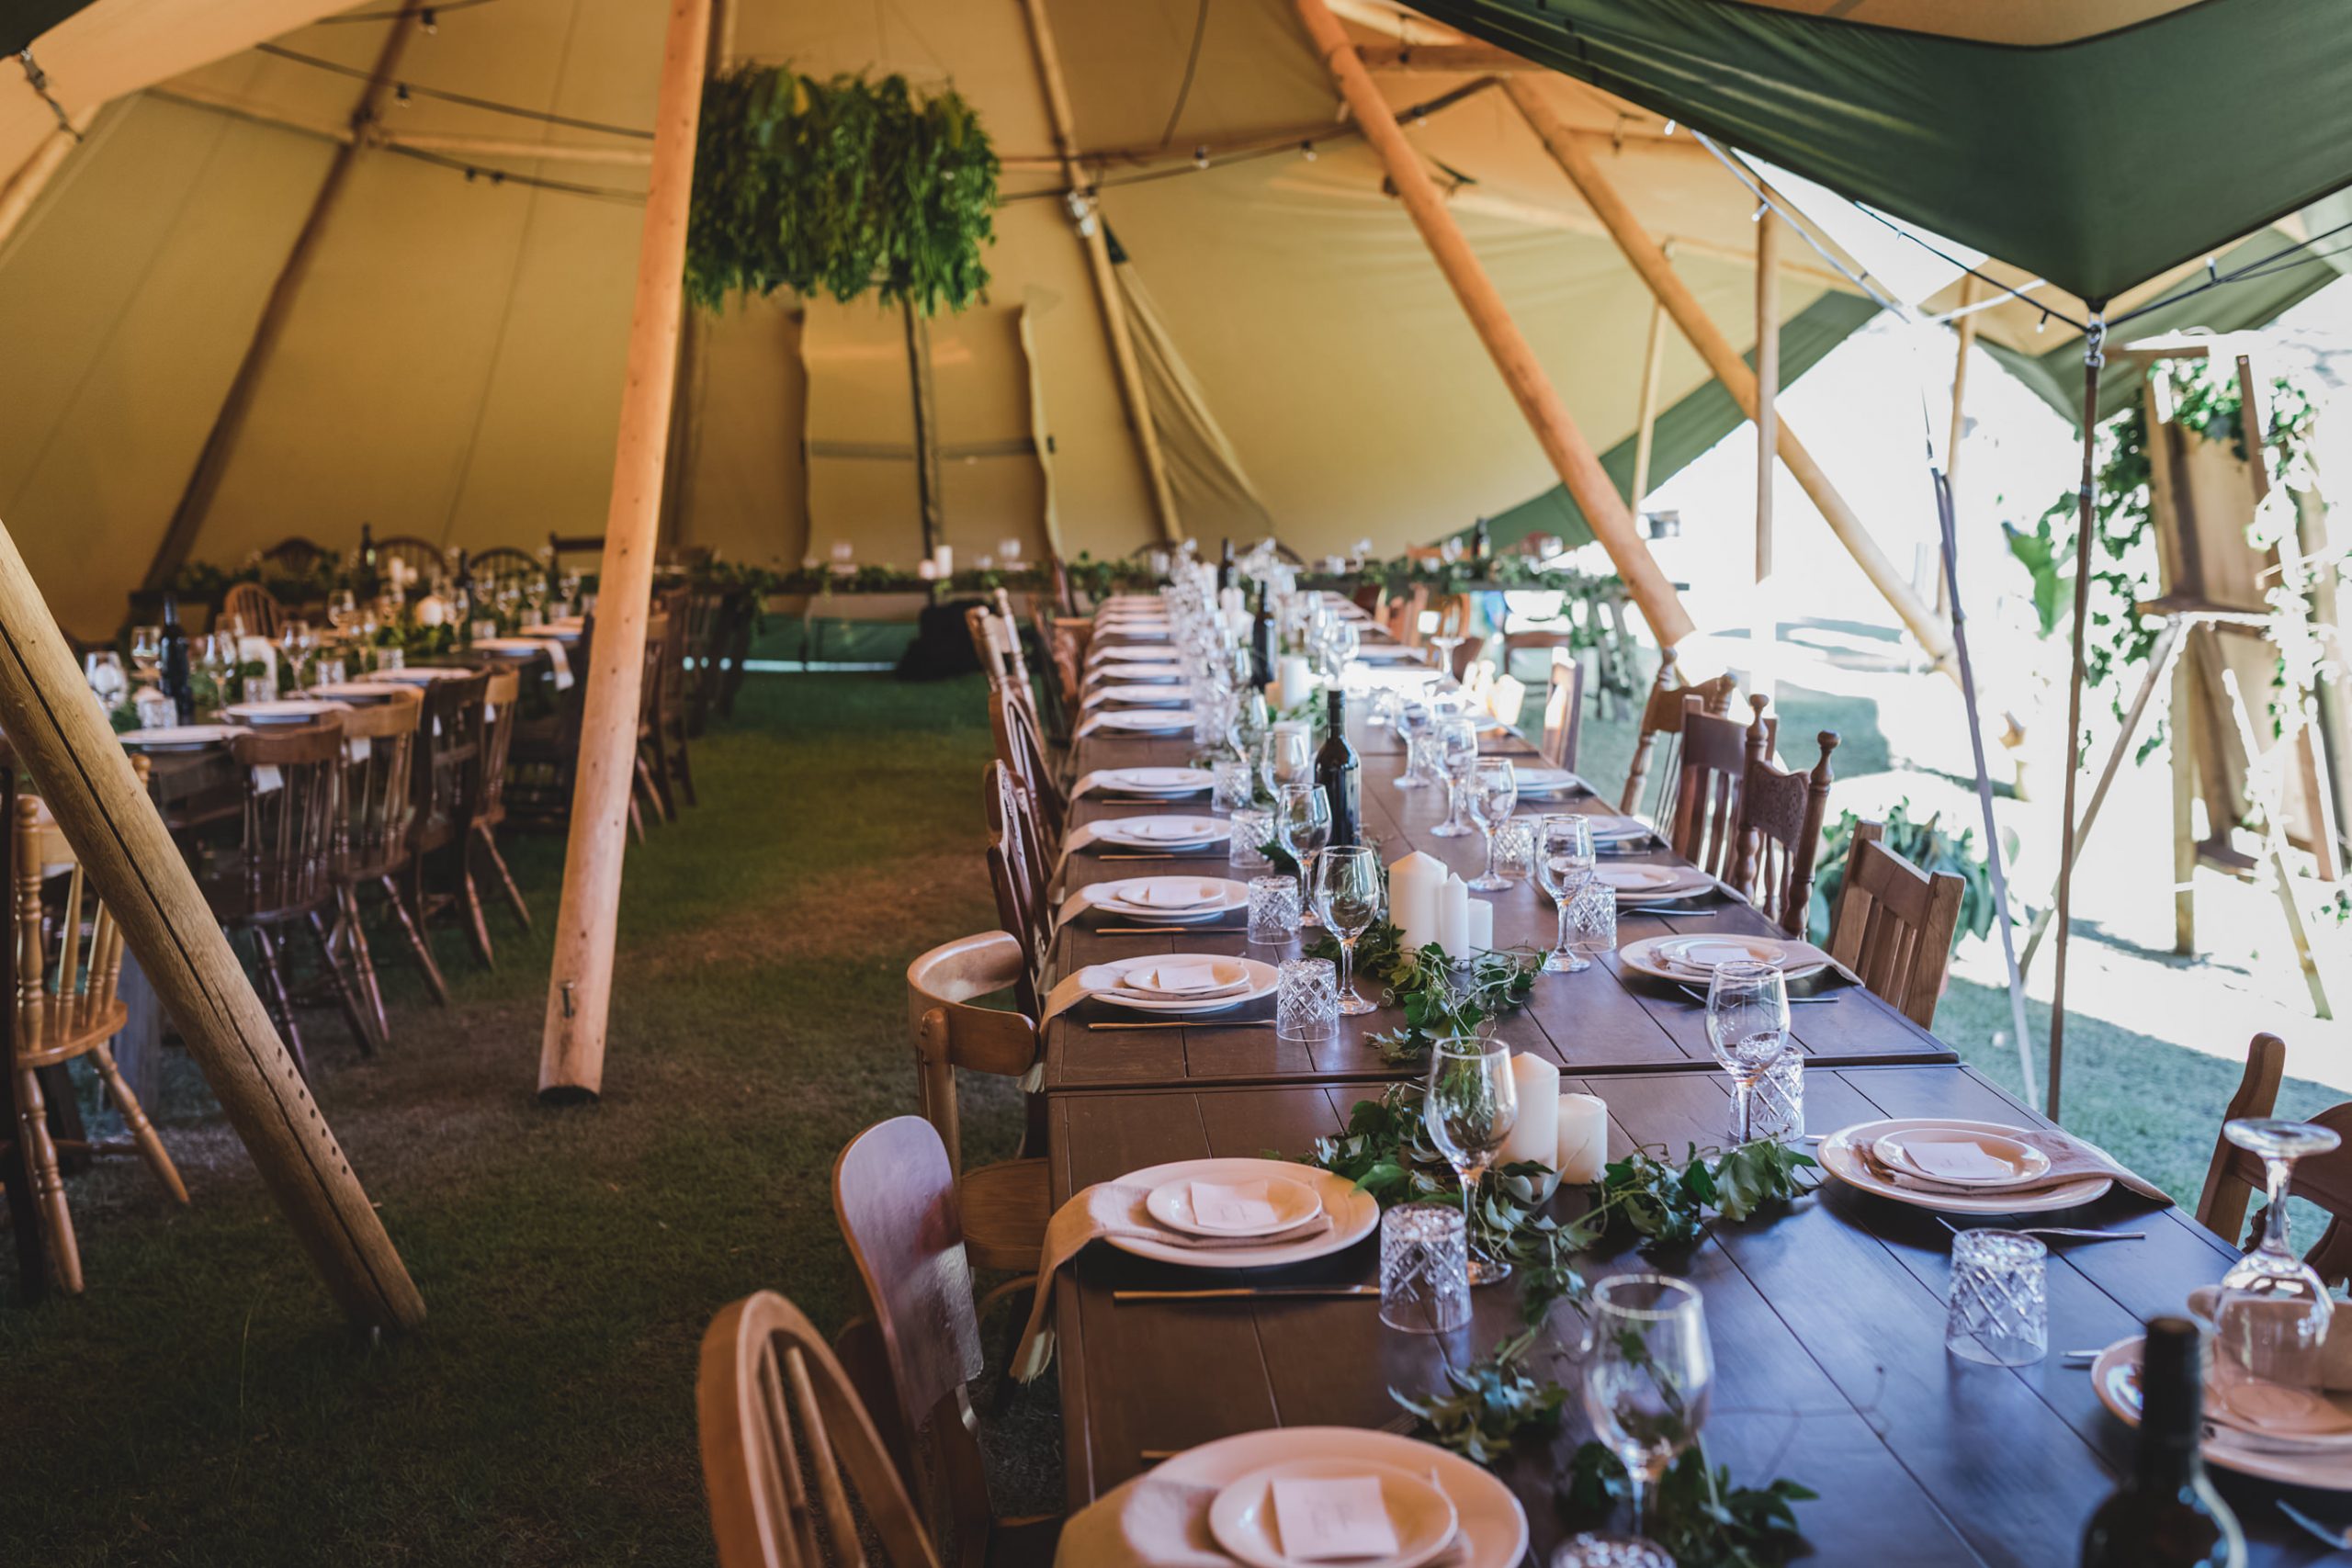 tipi wedding, large marquee hire, gold coast weddings, tipi, event hire, wedding, marquee hire, tables capes